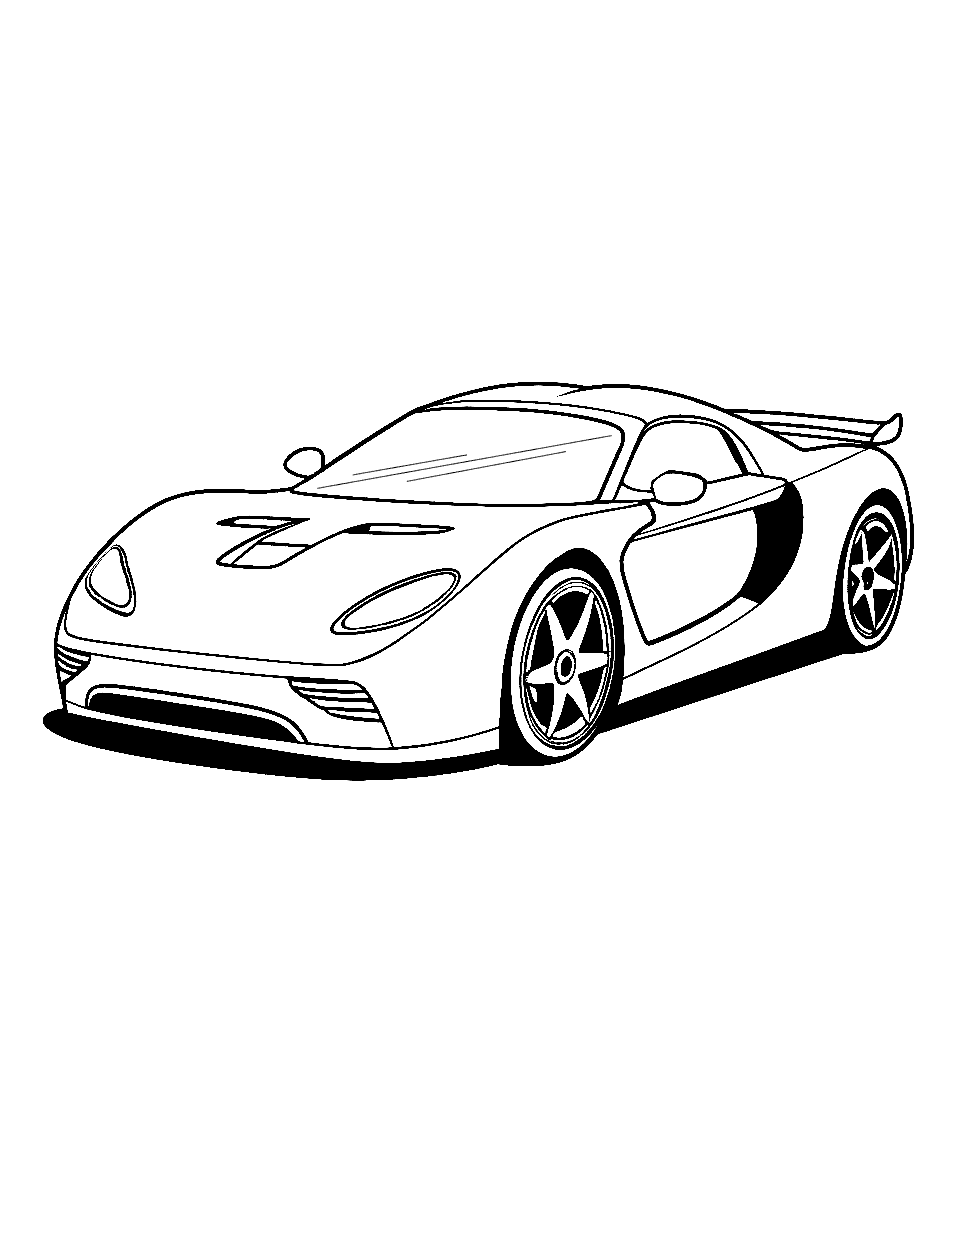 Simple Sports Car Race Coloring Page - A basic outline of a sleek sports car.